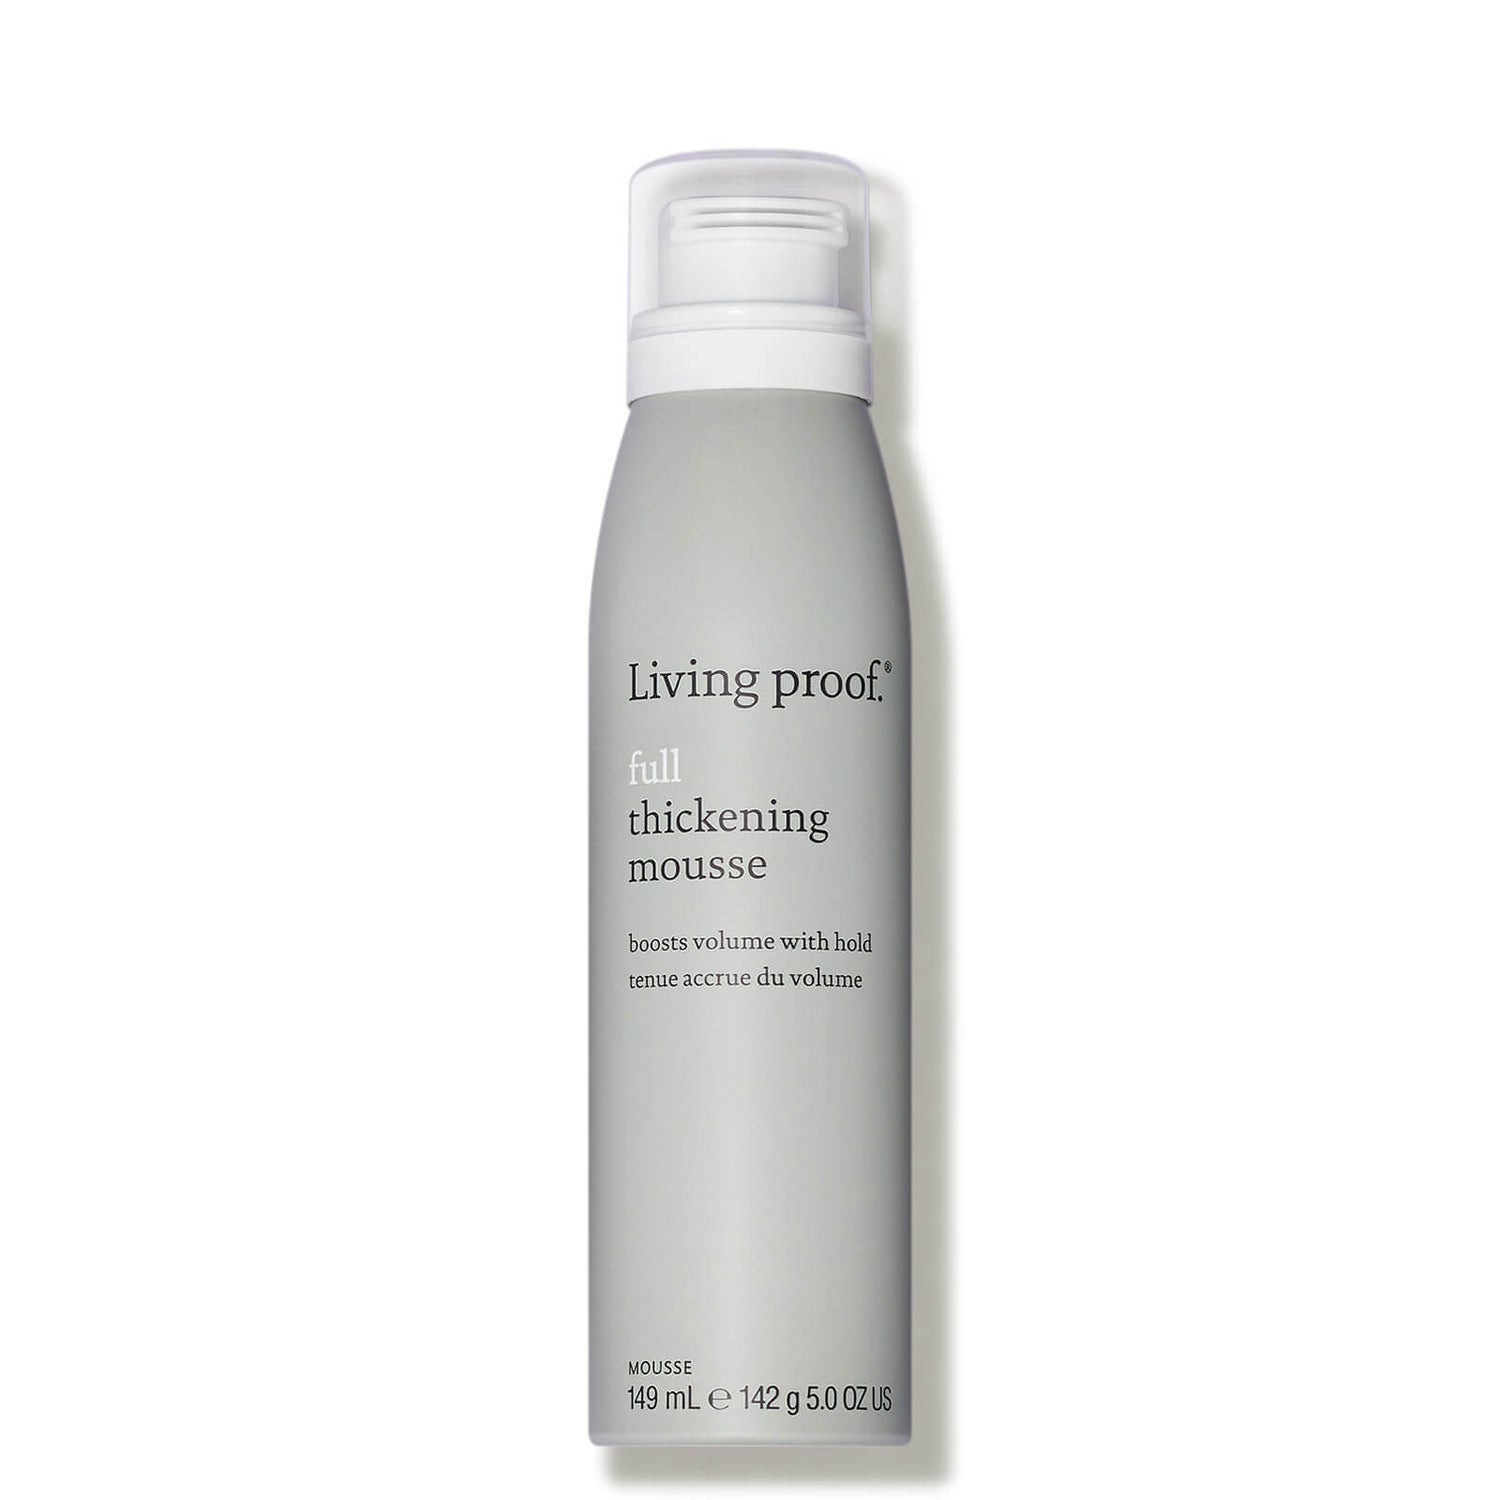 Mousse Full Thickening Living Proof 149 ml